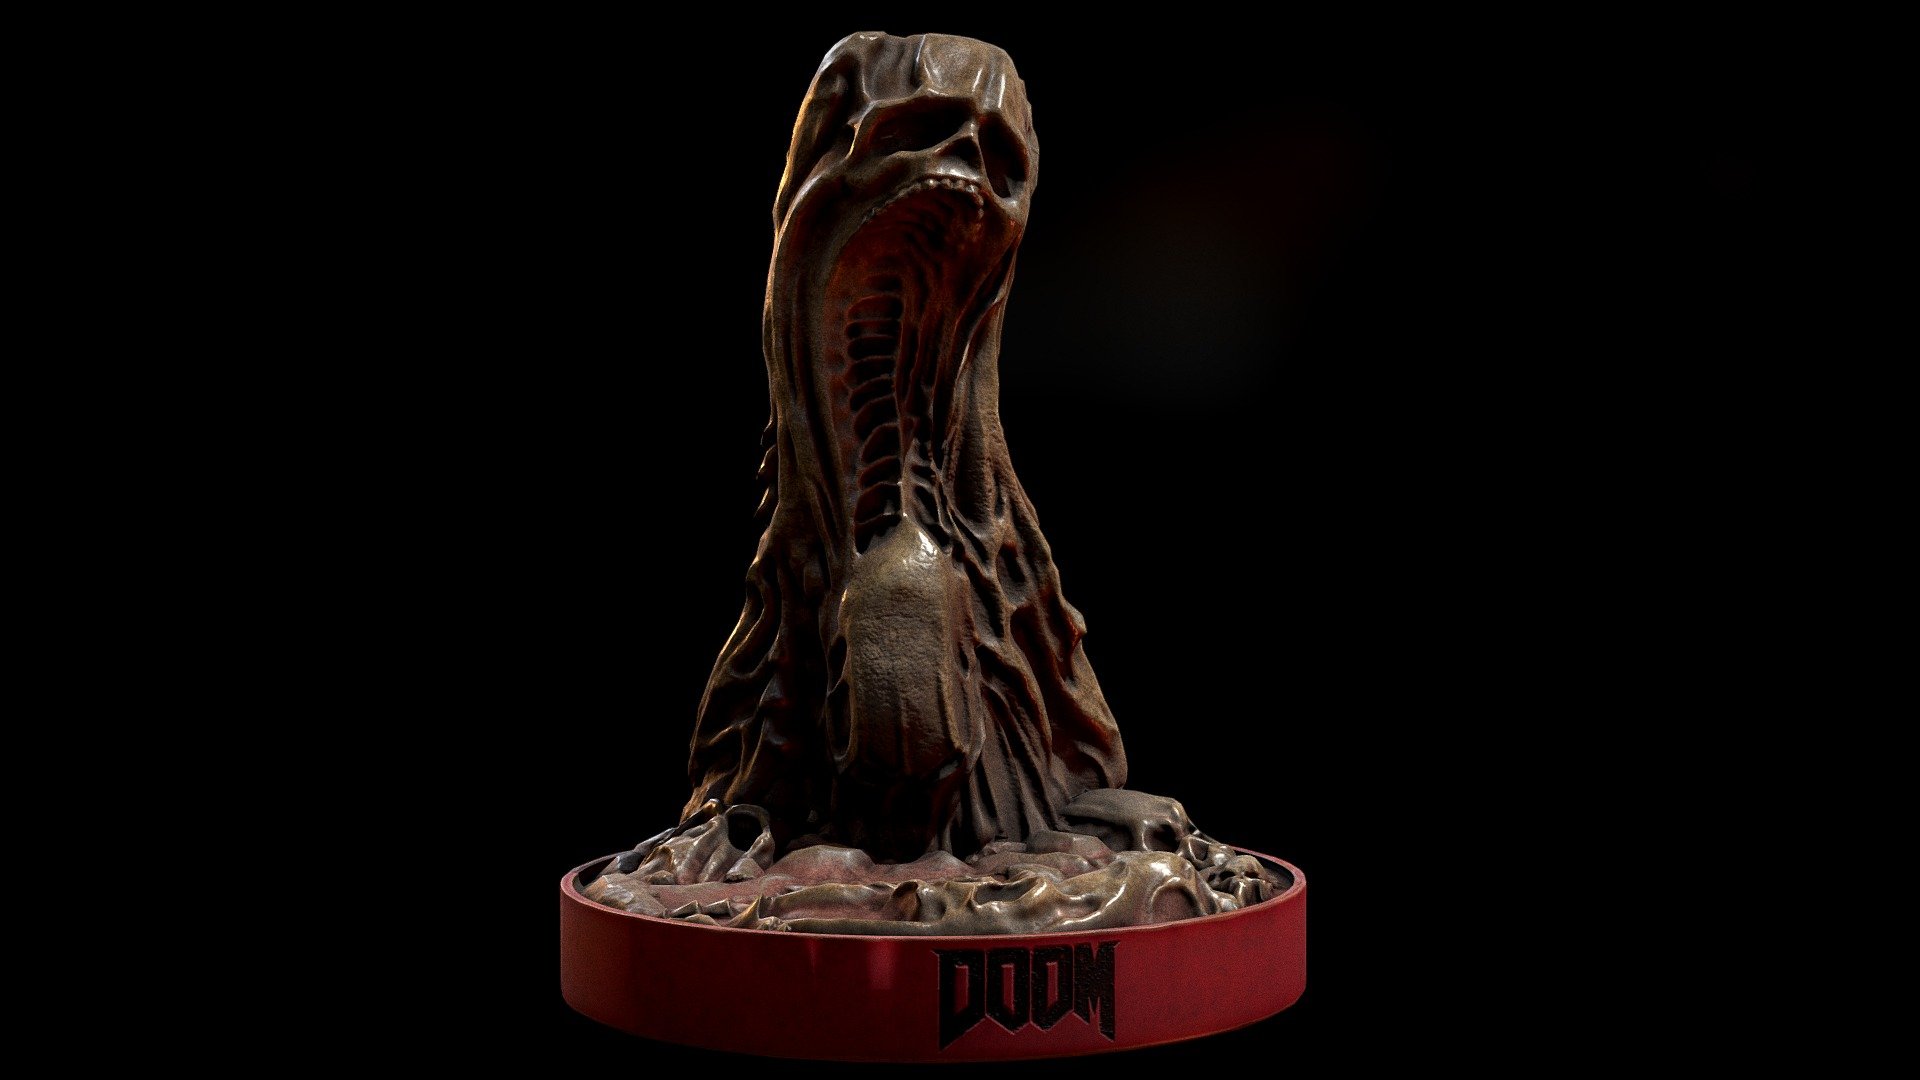 Desk decoration with base so you can place your mobile. Based on the Doom 2 score screen wallpaper. Ready for 3D printing as one fused mesh.
(Preview version is low poly model. Download for HI Res version) - Doom Skull Mobile Holder - Buy Royalty Free 3D model by Franco Ferrari (@franco_ferrari) 3d model